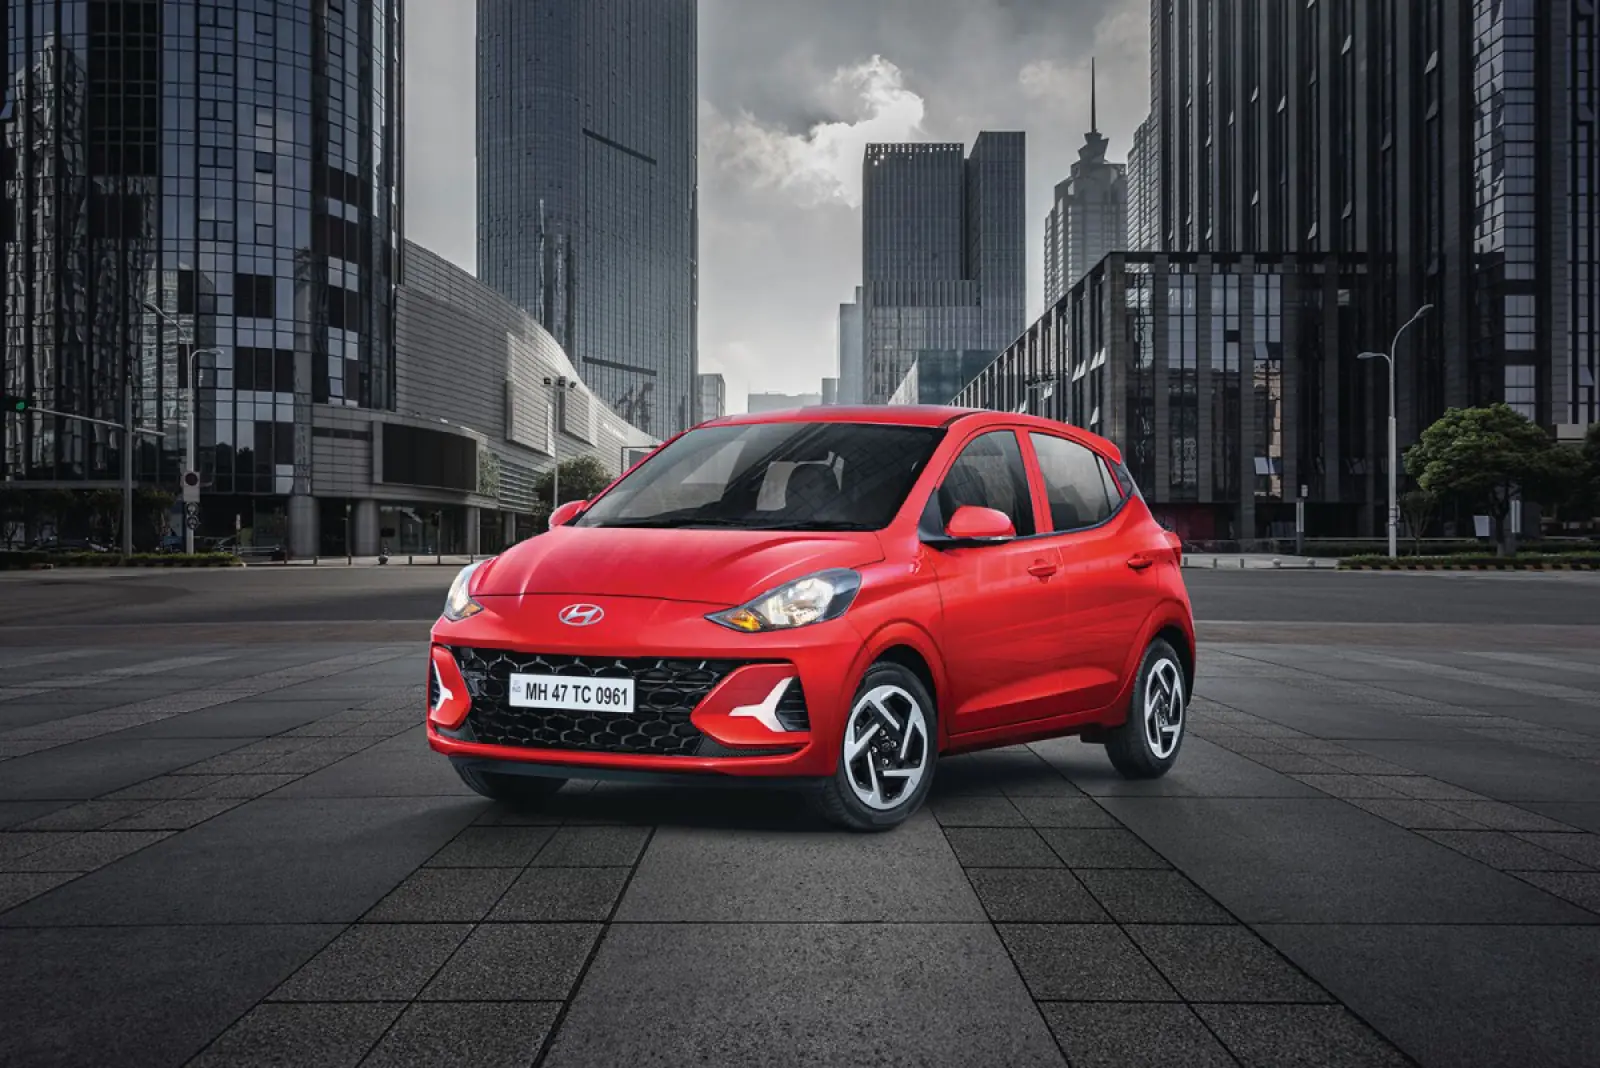 Hyundai Grand i10 Nios business version launched; Know the features and price